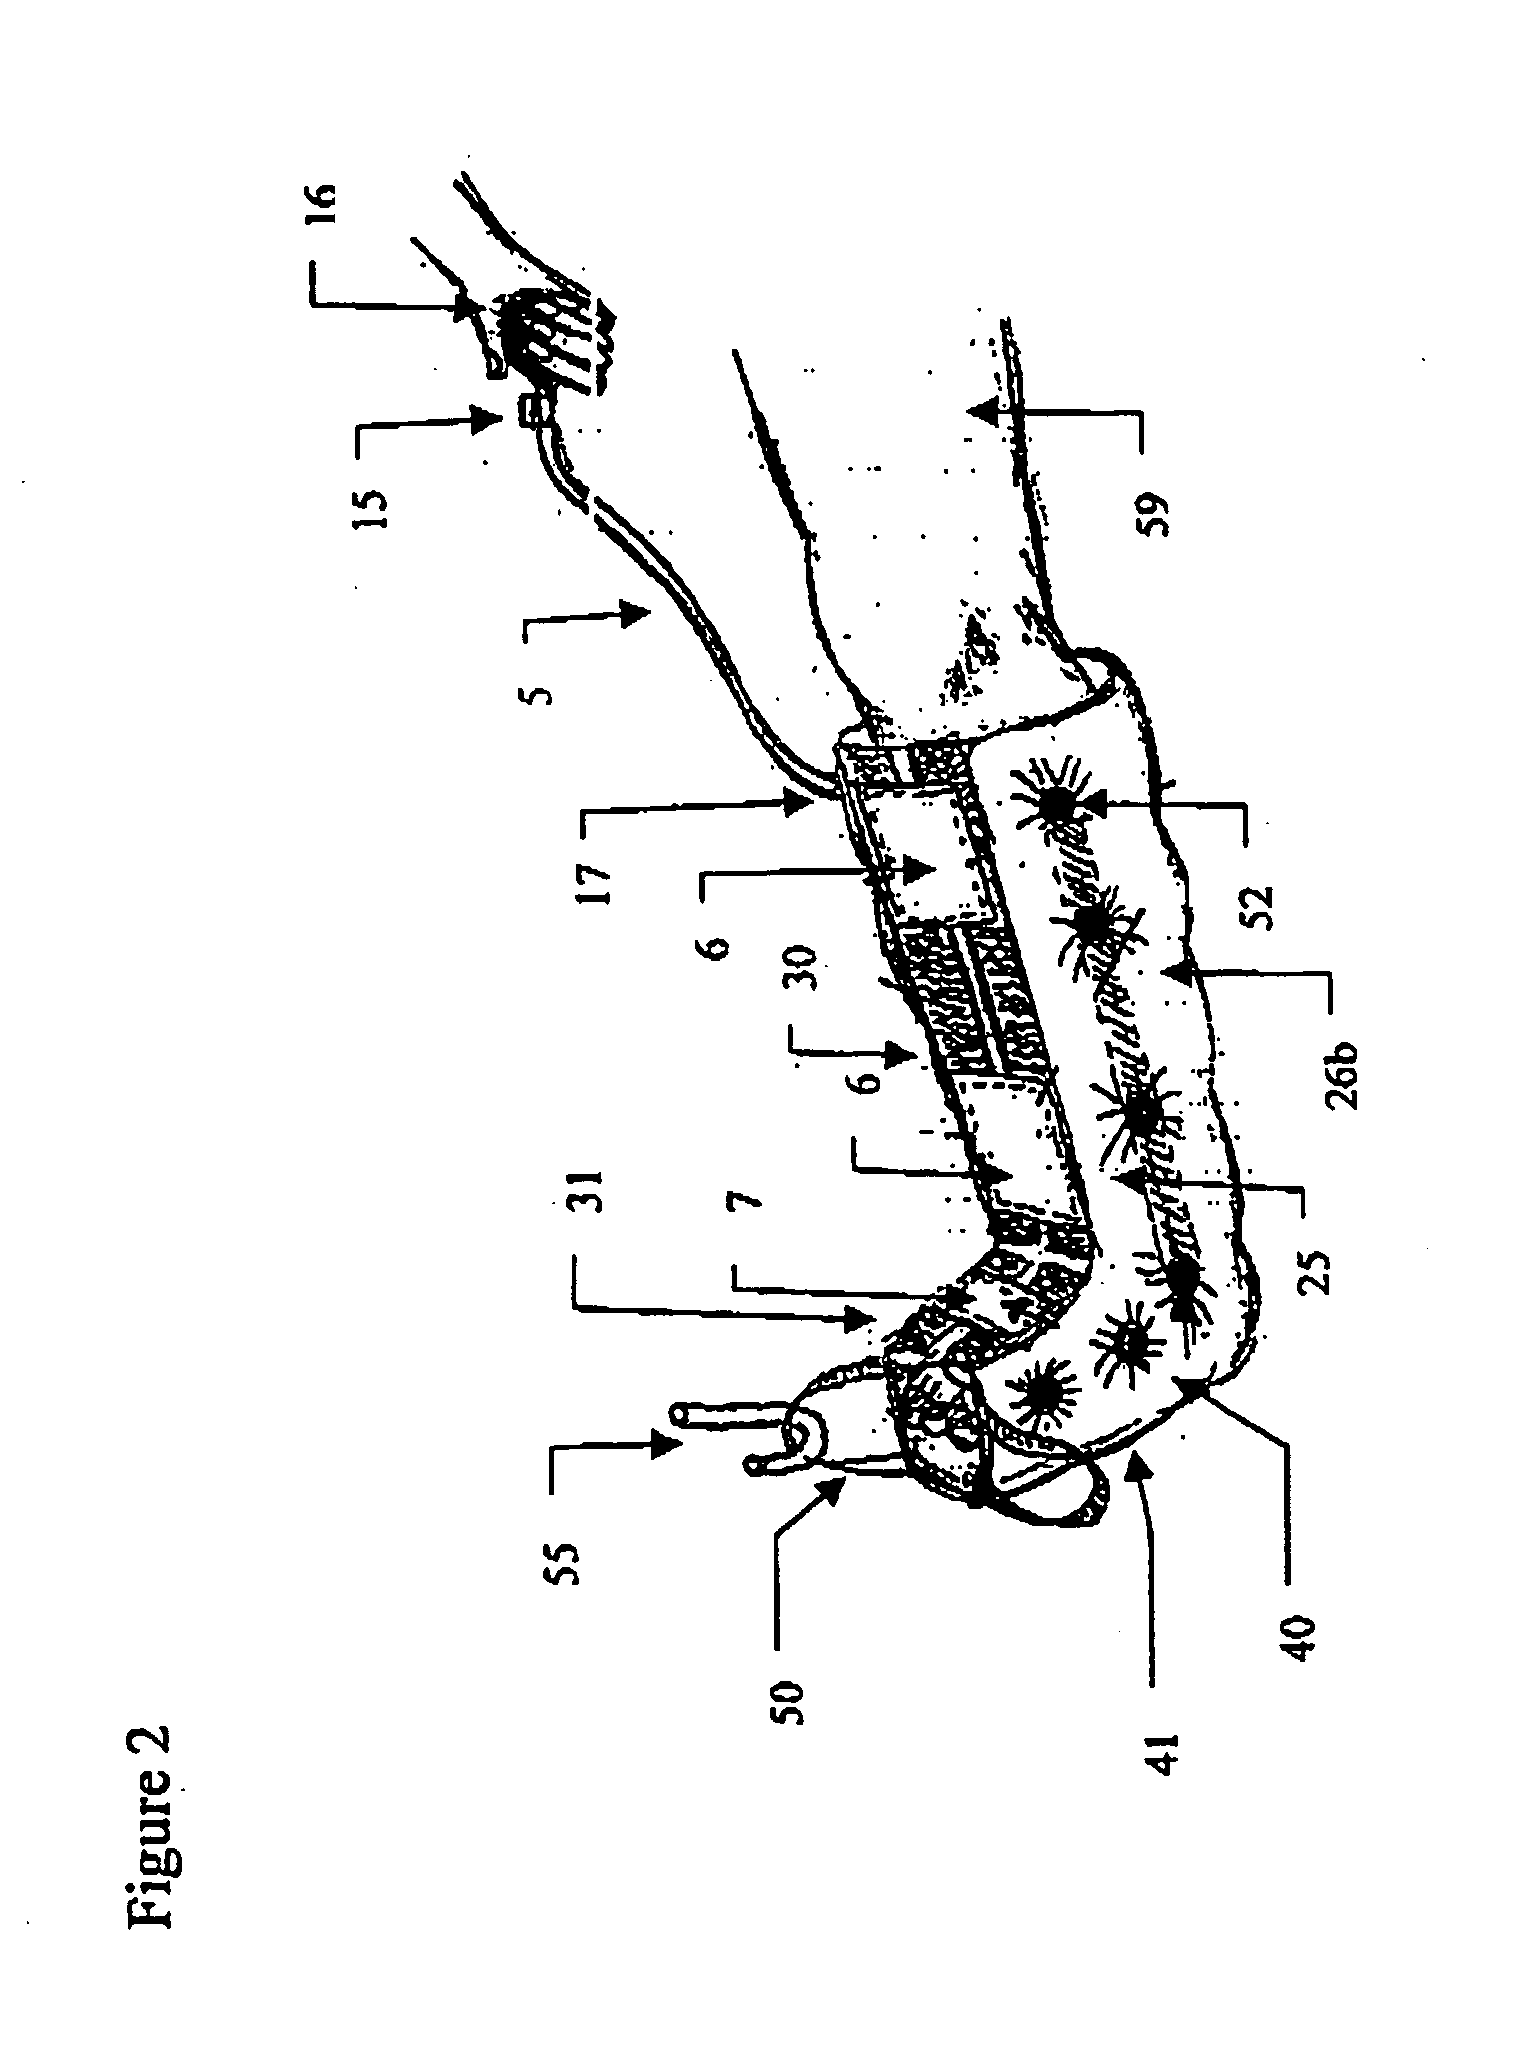 Immobilizing and supporting inflatable splint apparatus